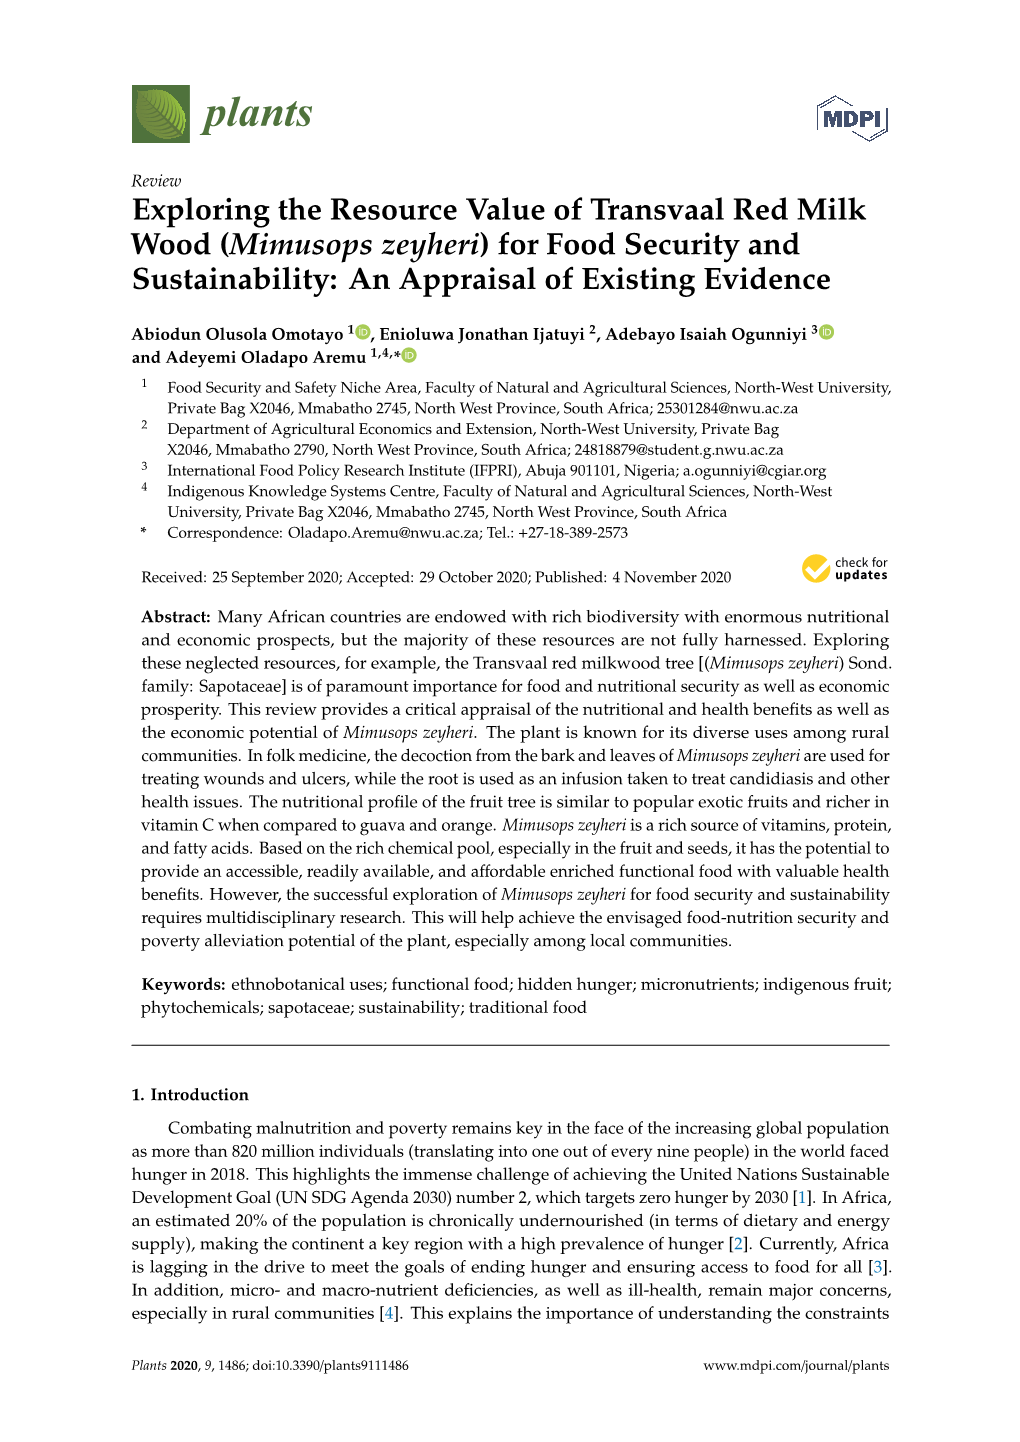 (Mimusops Zeyheri) for Food Security and Sustainability: an Appraisal of Existing Evidence